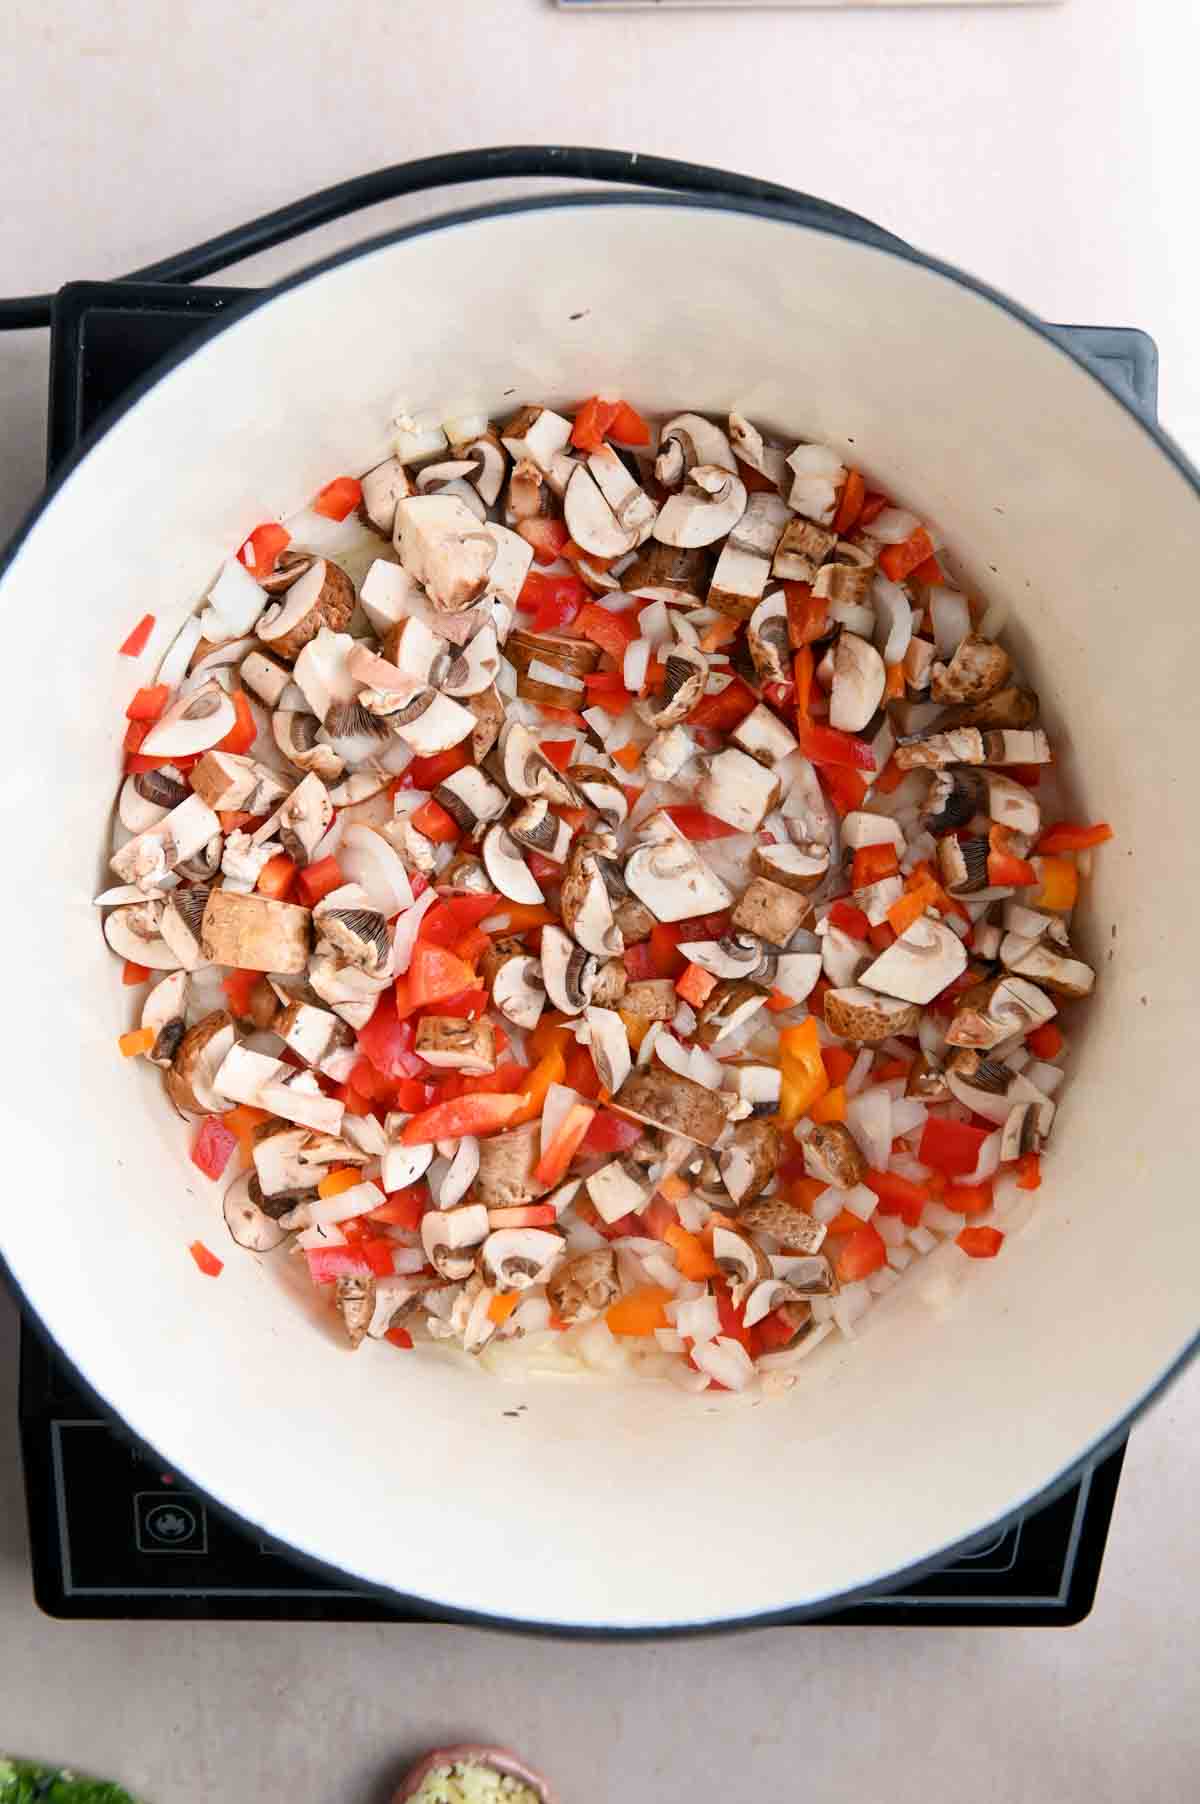 Diced mushrooms, peppers, and onions in a Dutch oven.